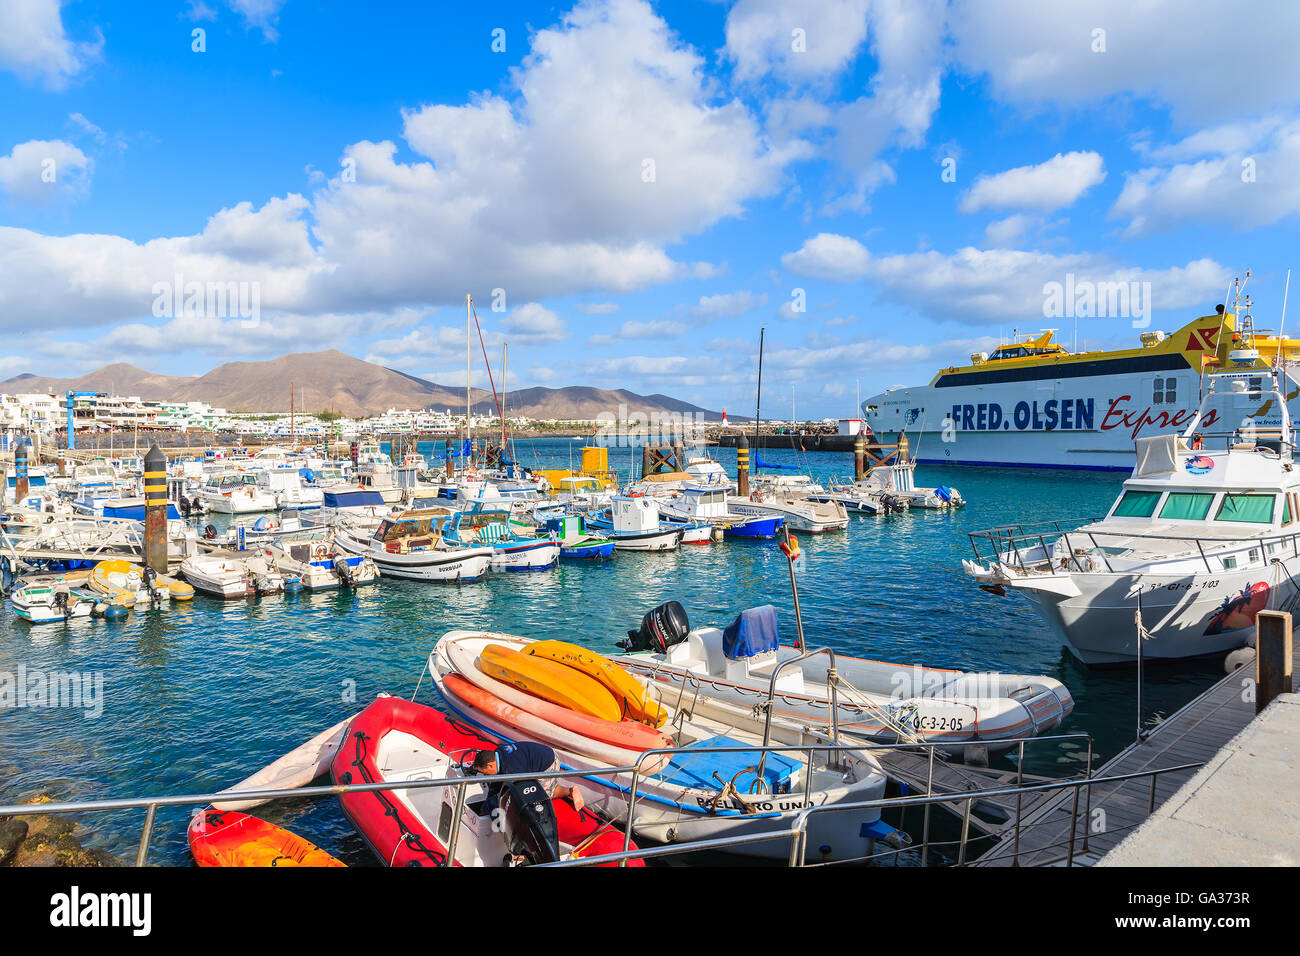 PLAYA BLANCA PORT, LANZAROTE ISLAND - JAN 17, 2015: colourful boats in Playa Blanca harbour on sunny day. Lanzarote is very popular tourist destination among Canary Islands archipelago. Stock Photo